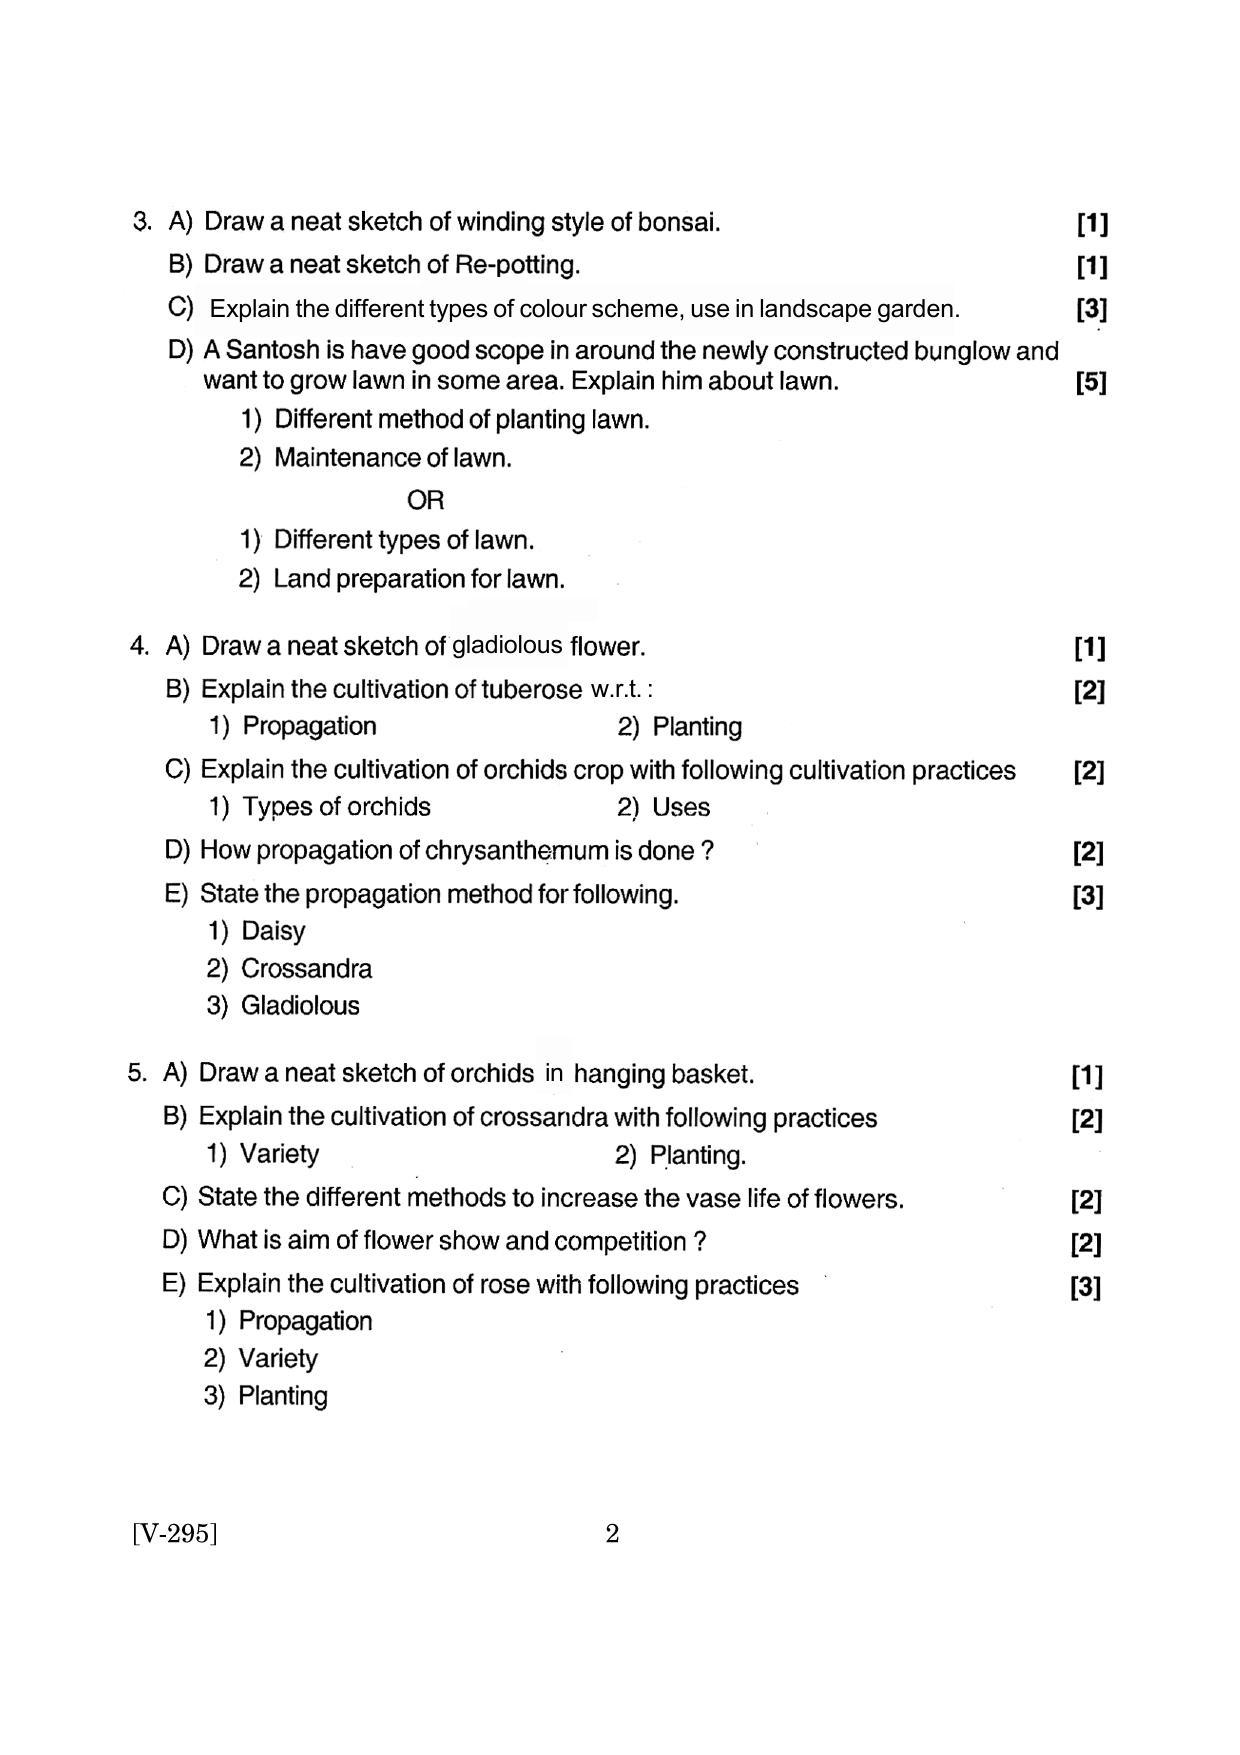 Goa Board Class 12 Vegetables Floriculture & Landscaping  2019 (March 2019) Question Paper - Page 2